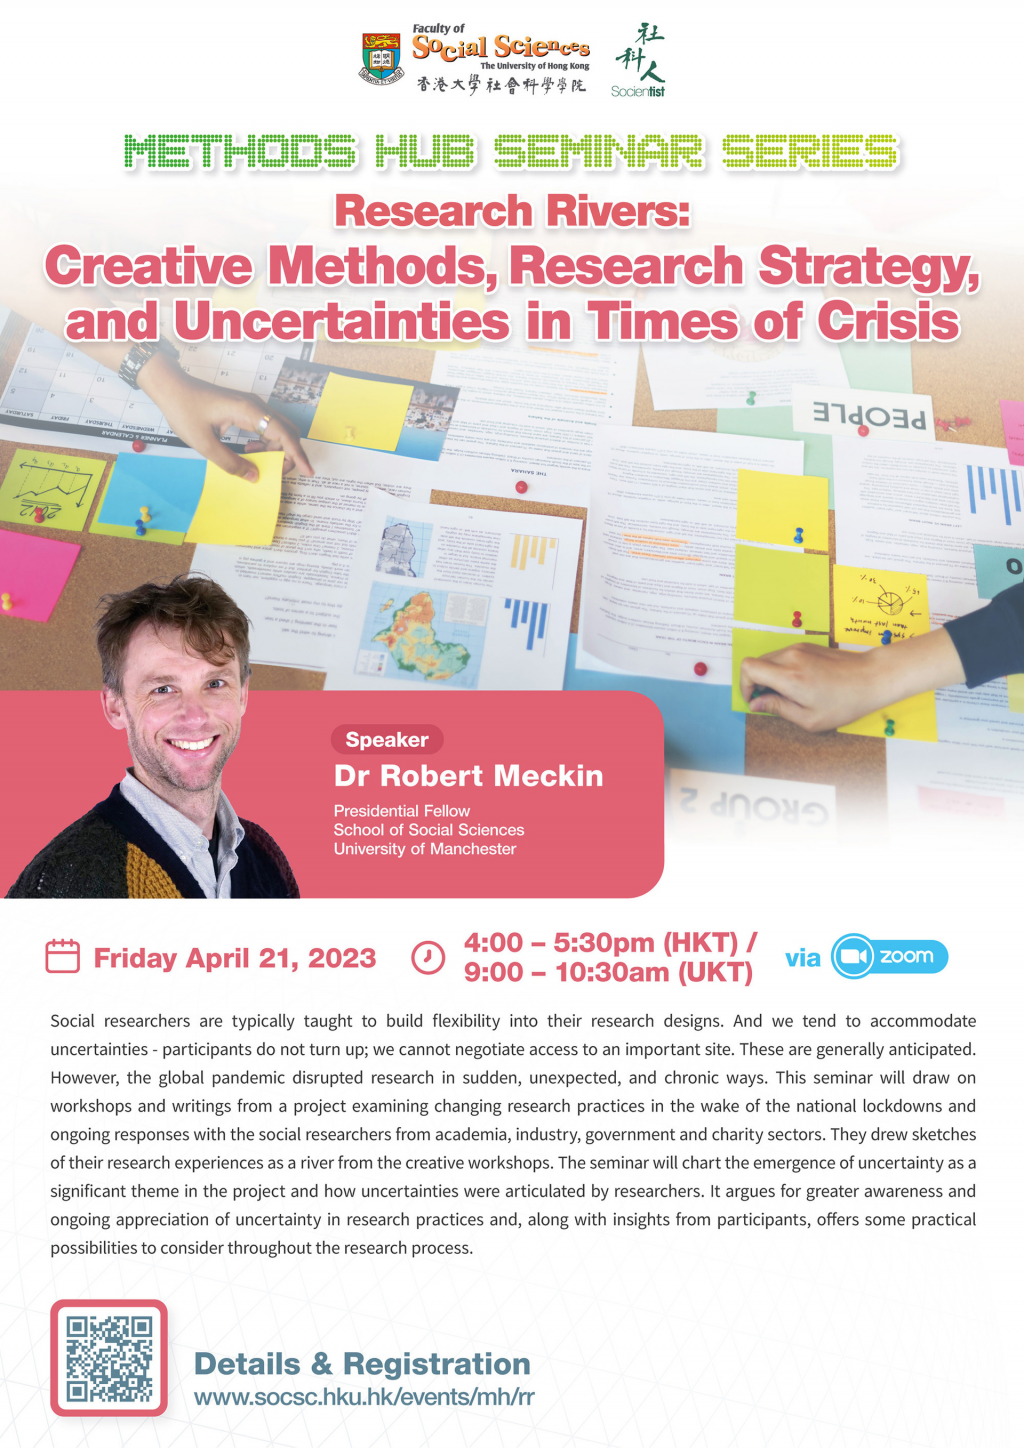 Methods Hub Seminar Series - Research Rivers: Creative Methods, Research Strategy, and Uncertainties in Times of Crisis